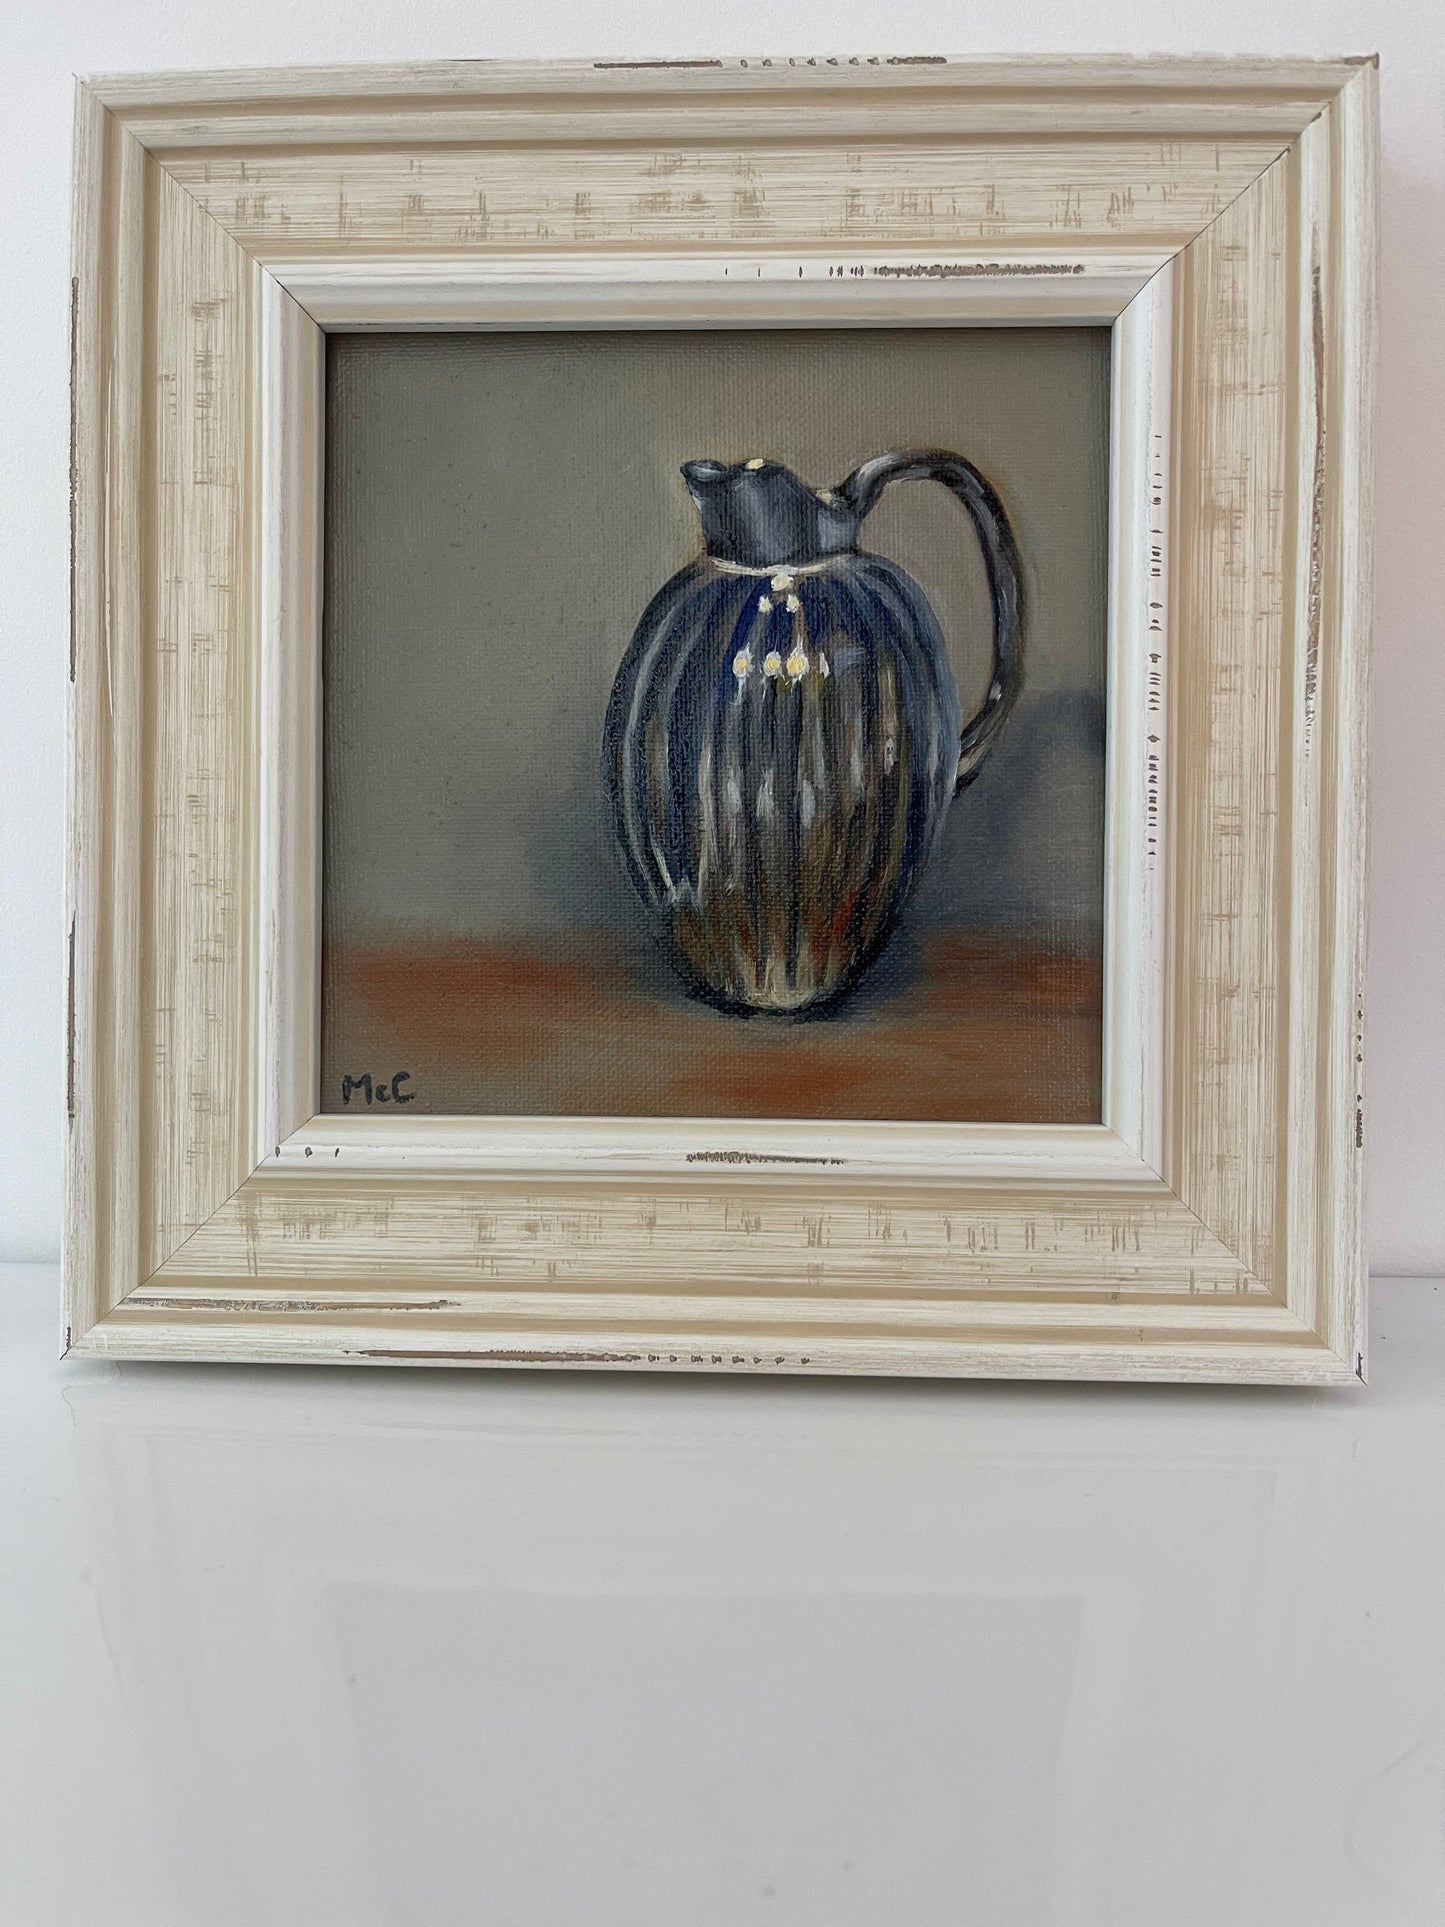 Silver Pitcher Still Life | Original Oil Painting | 6 x 6 inches with optional frame